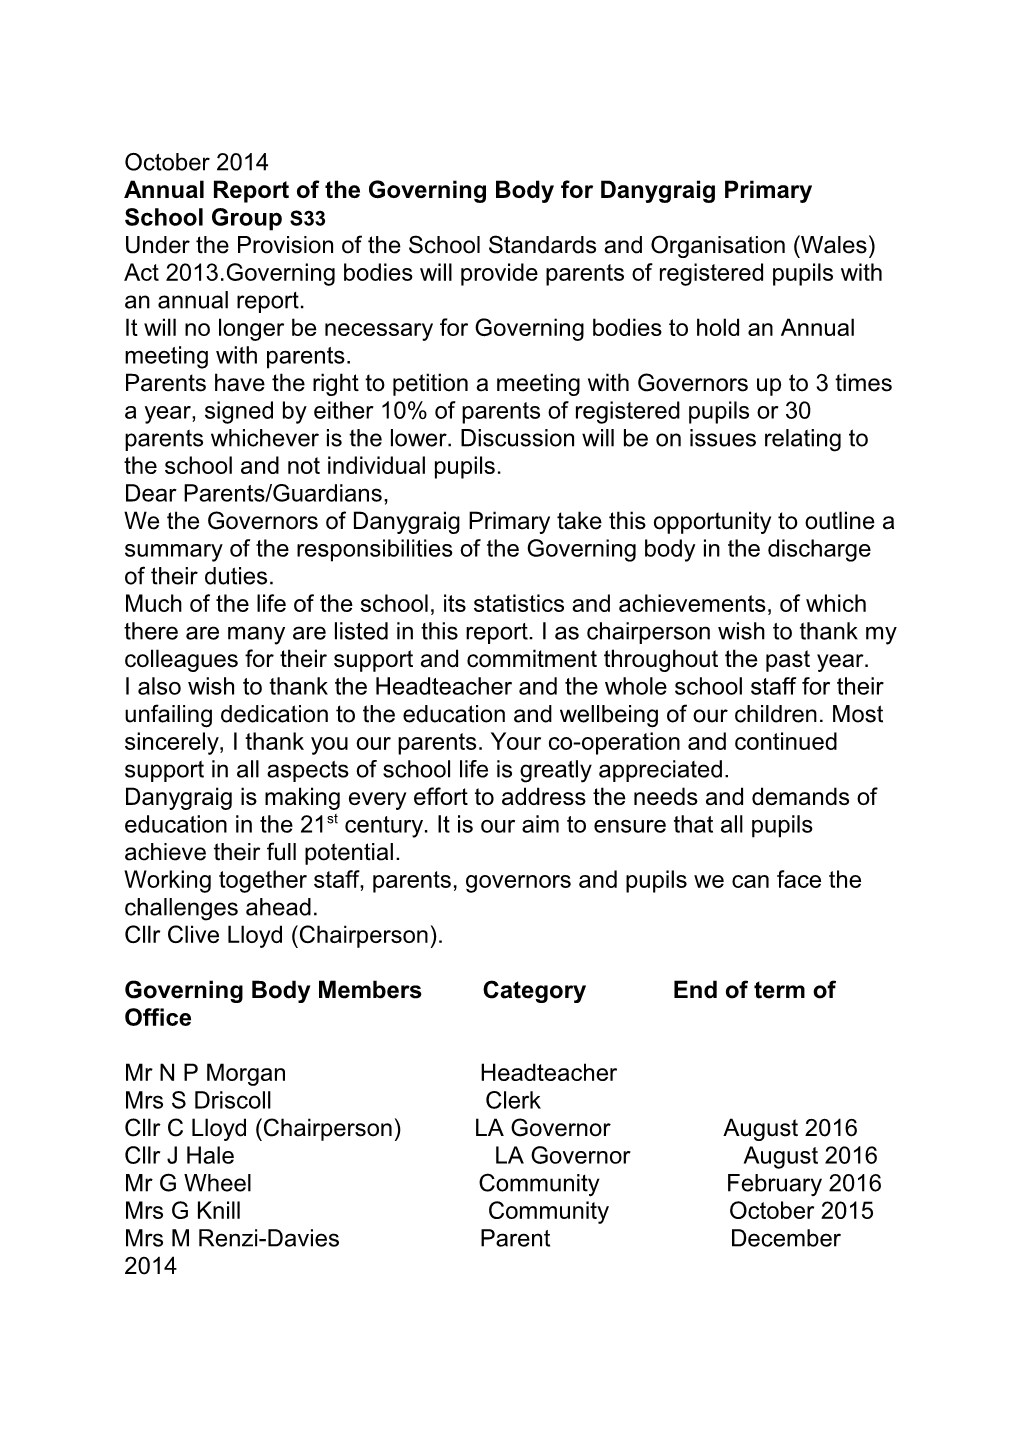 Annual Report of the Governing Body for Danygraig Primary School Group S33